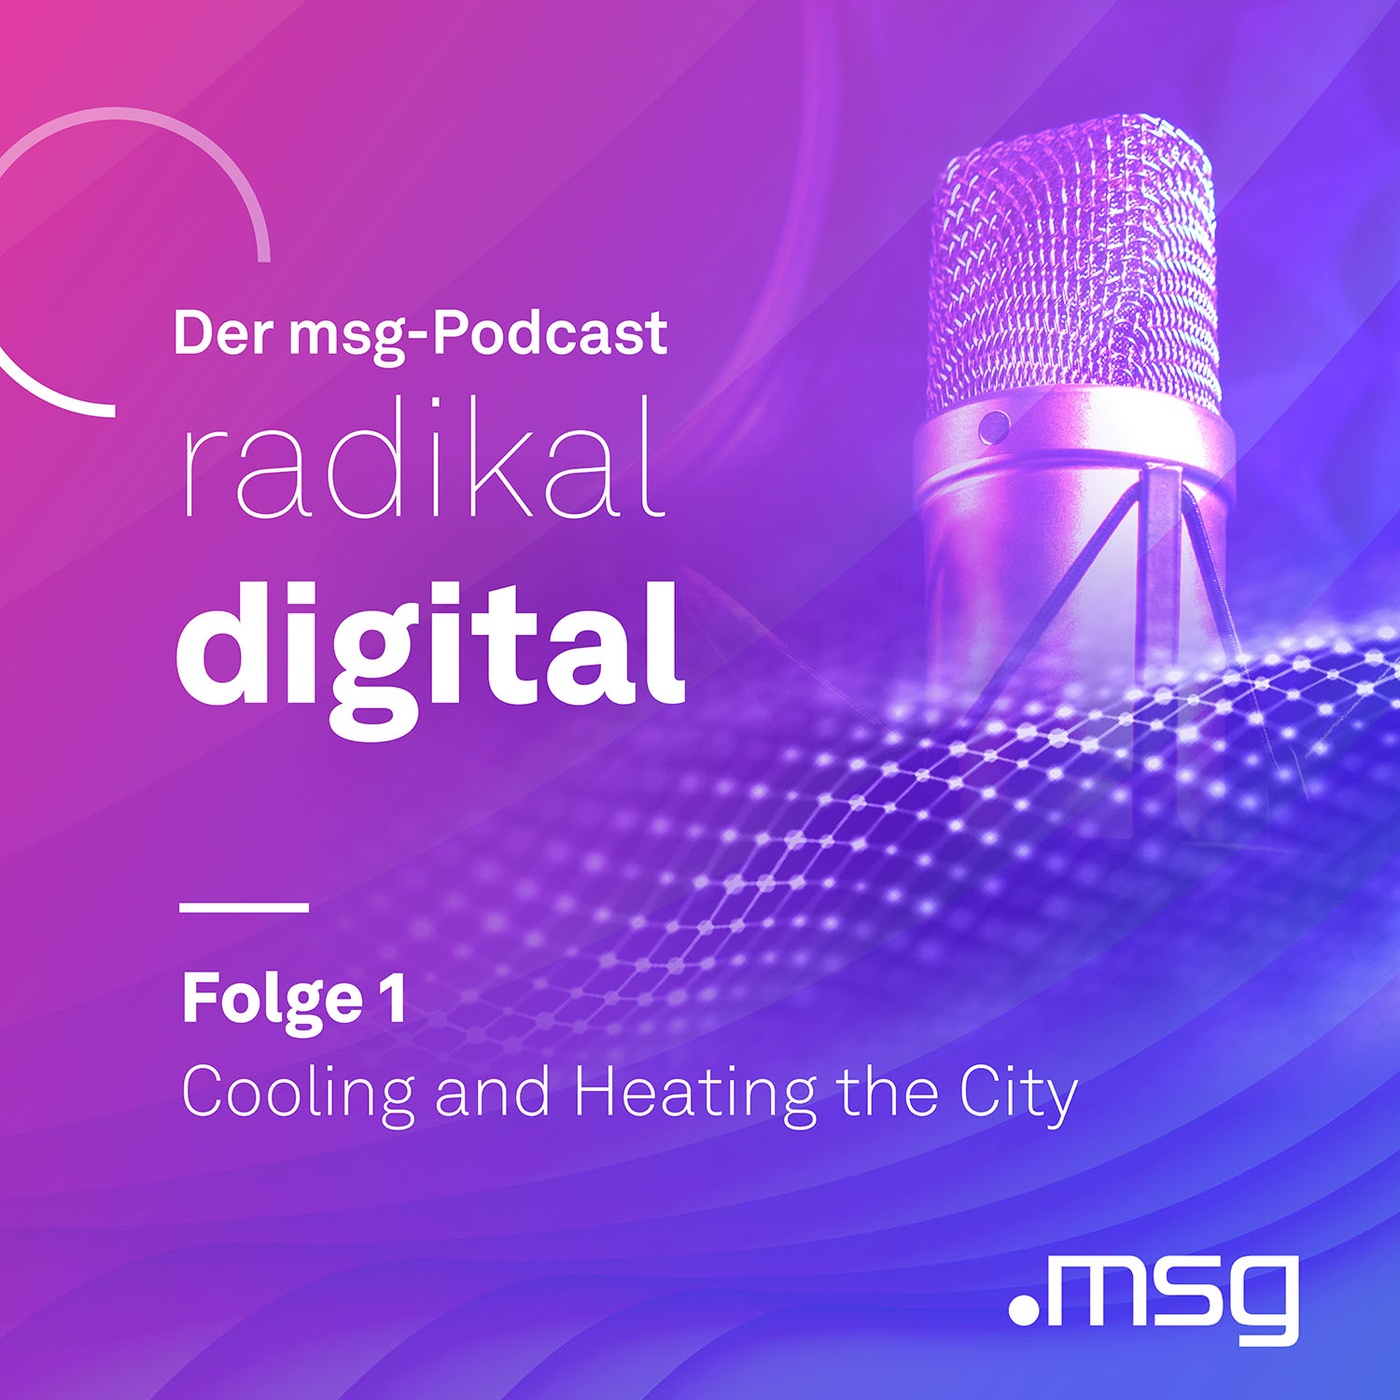 Folge 1: Cooling and Heating the City